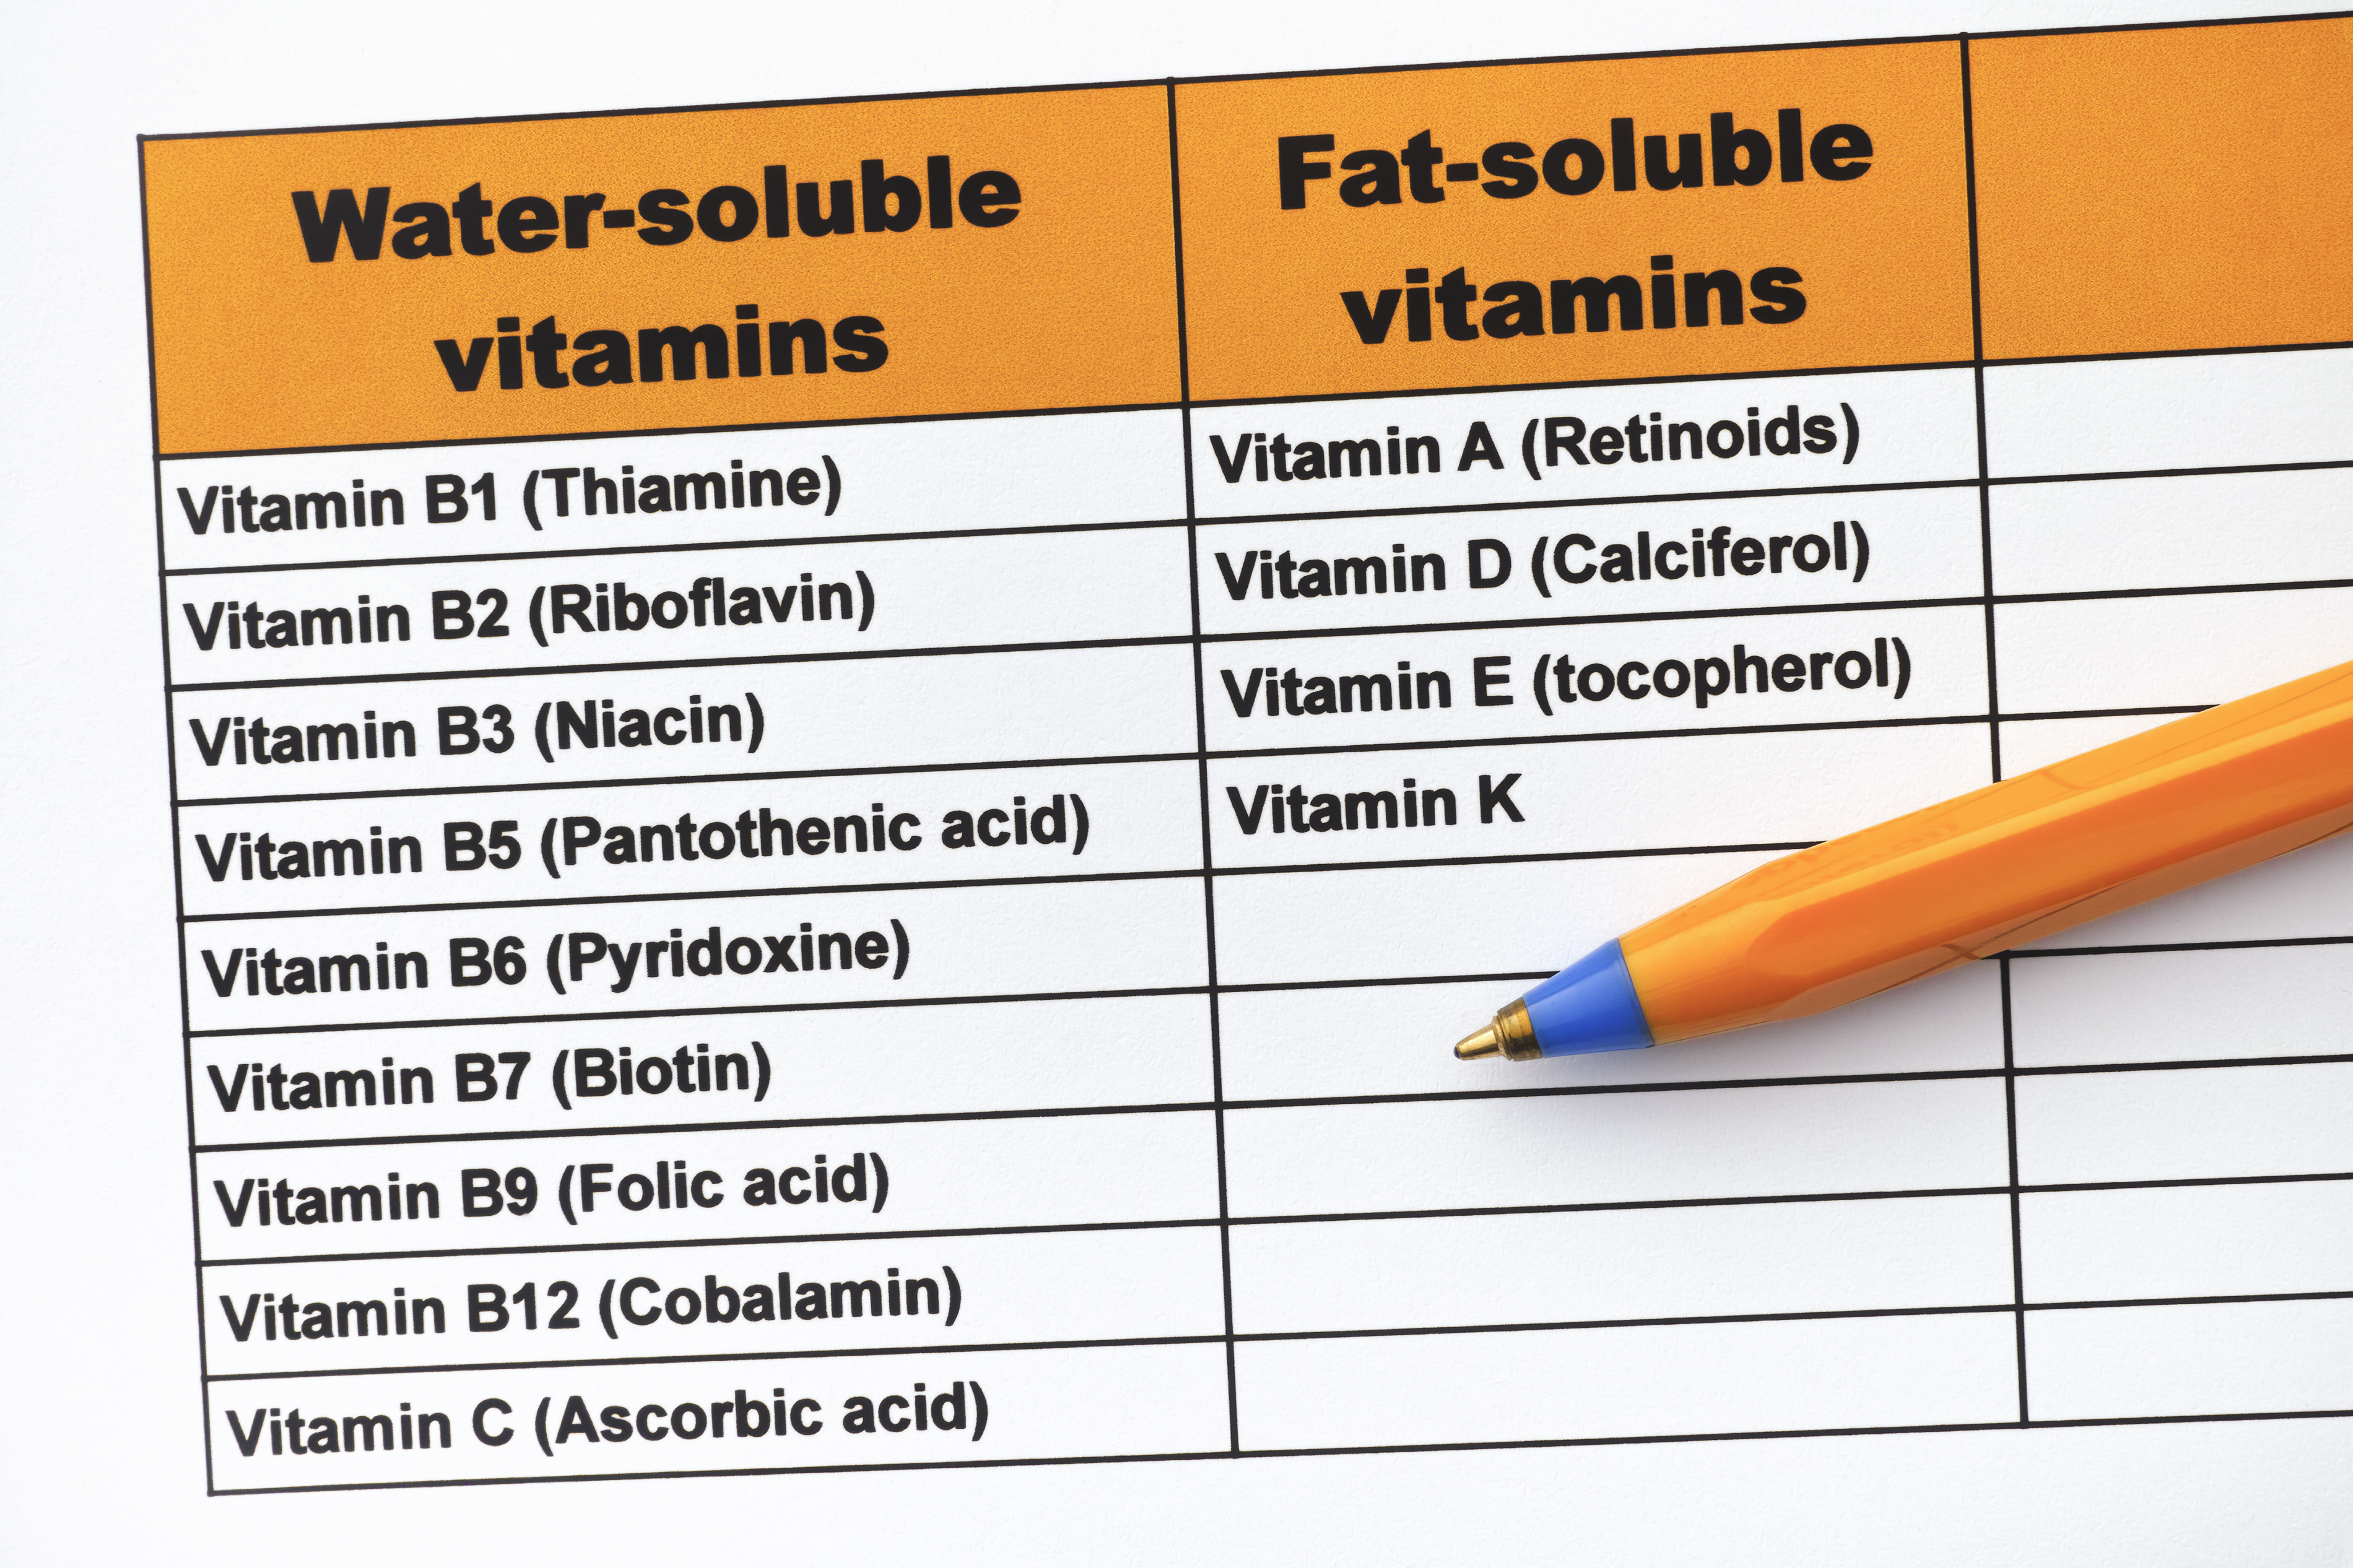 division of vitamins into fat-soluble and water-soluble.